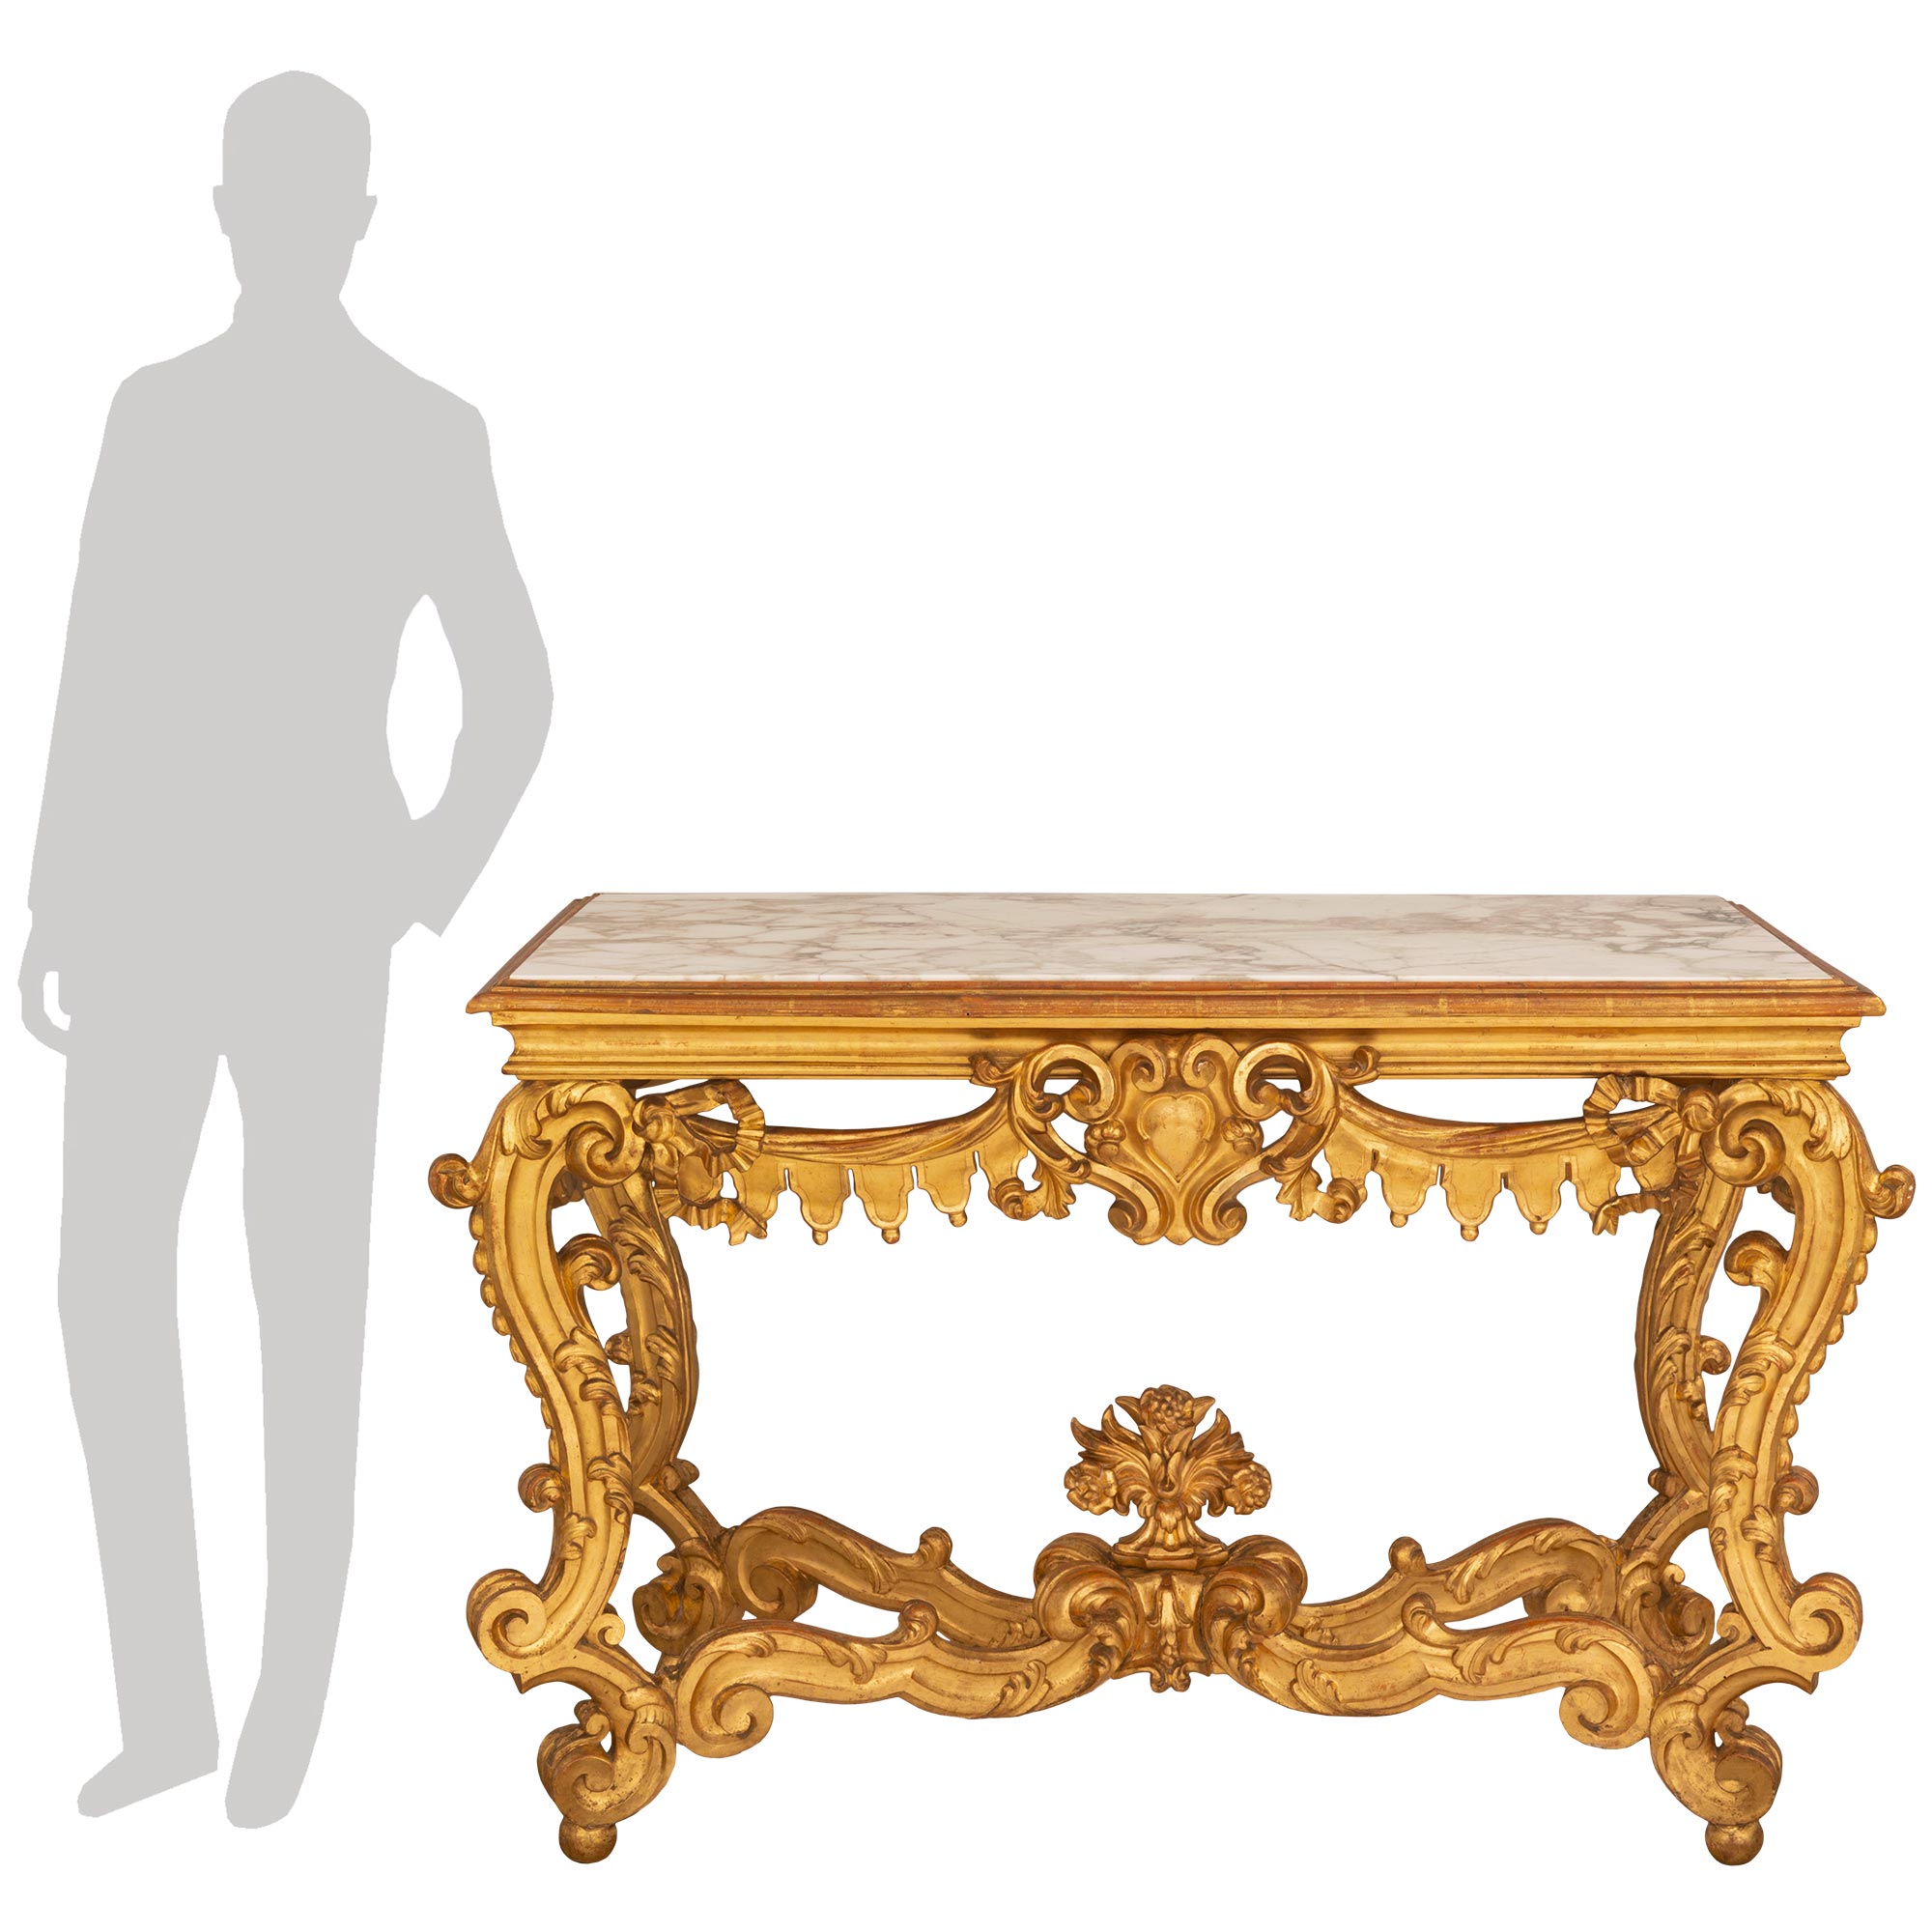 Italian Mid-19th Century Venetian Giltwood and Marble Freestanding Console For Sale